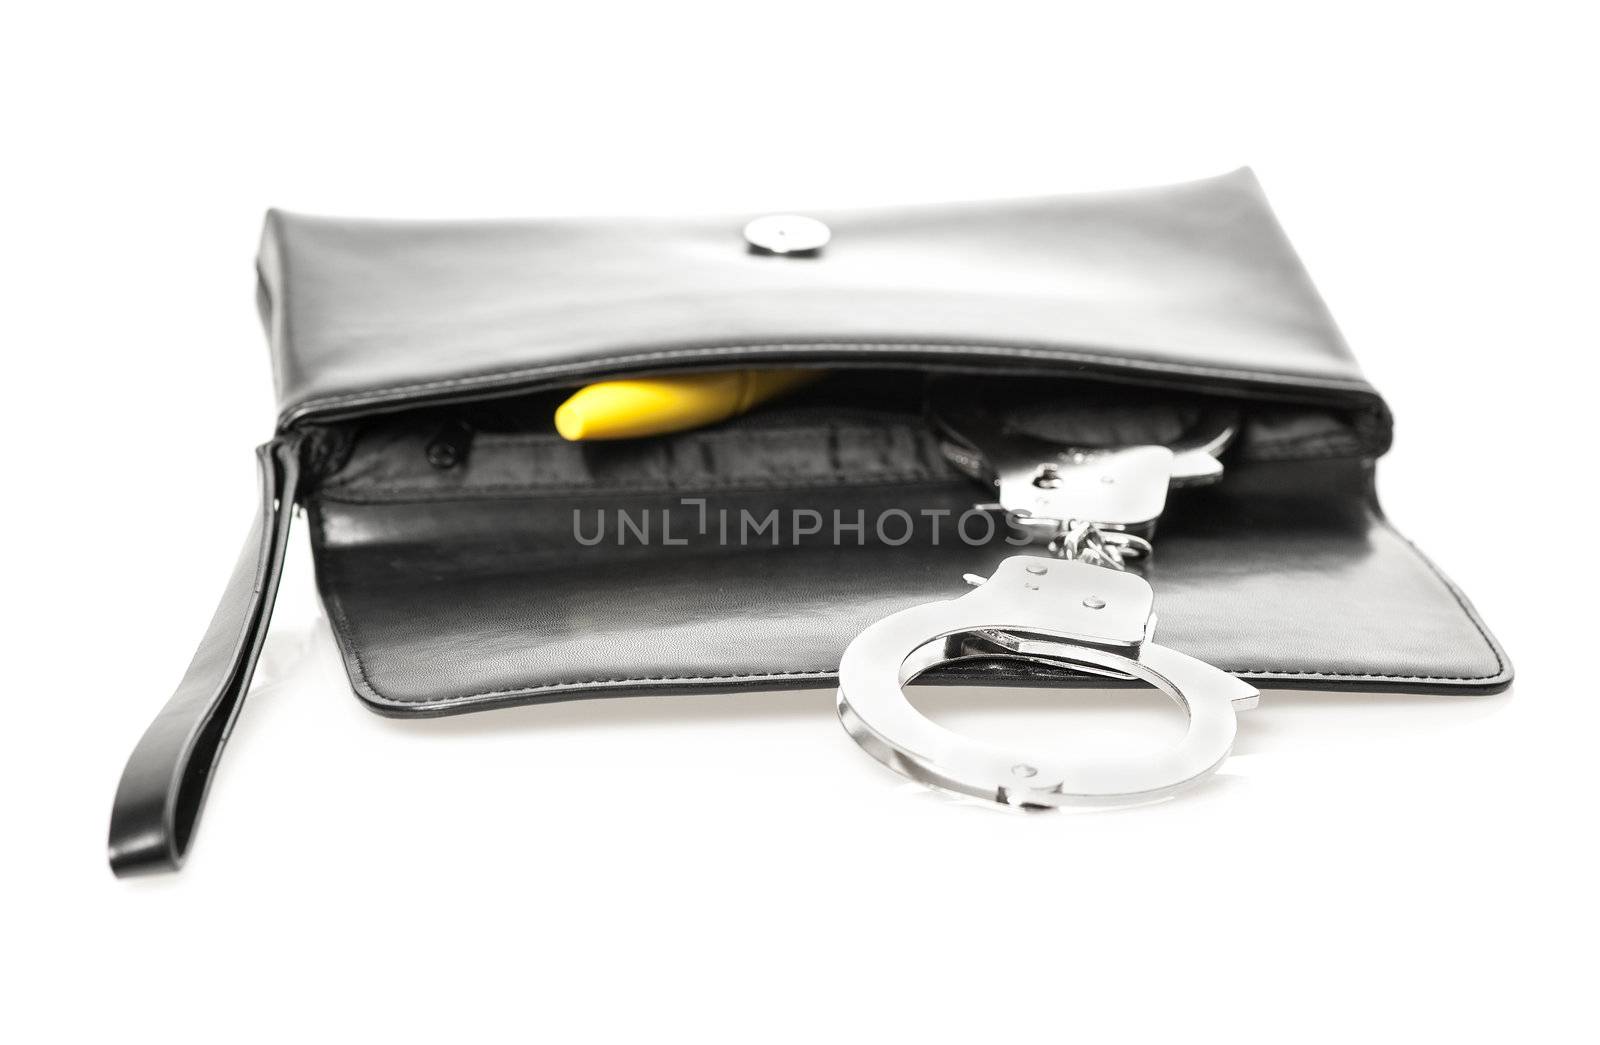 Clutch bag with explizit content by stockbymh